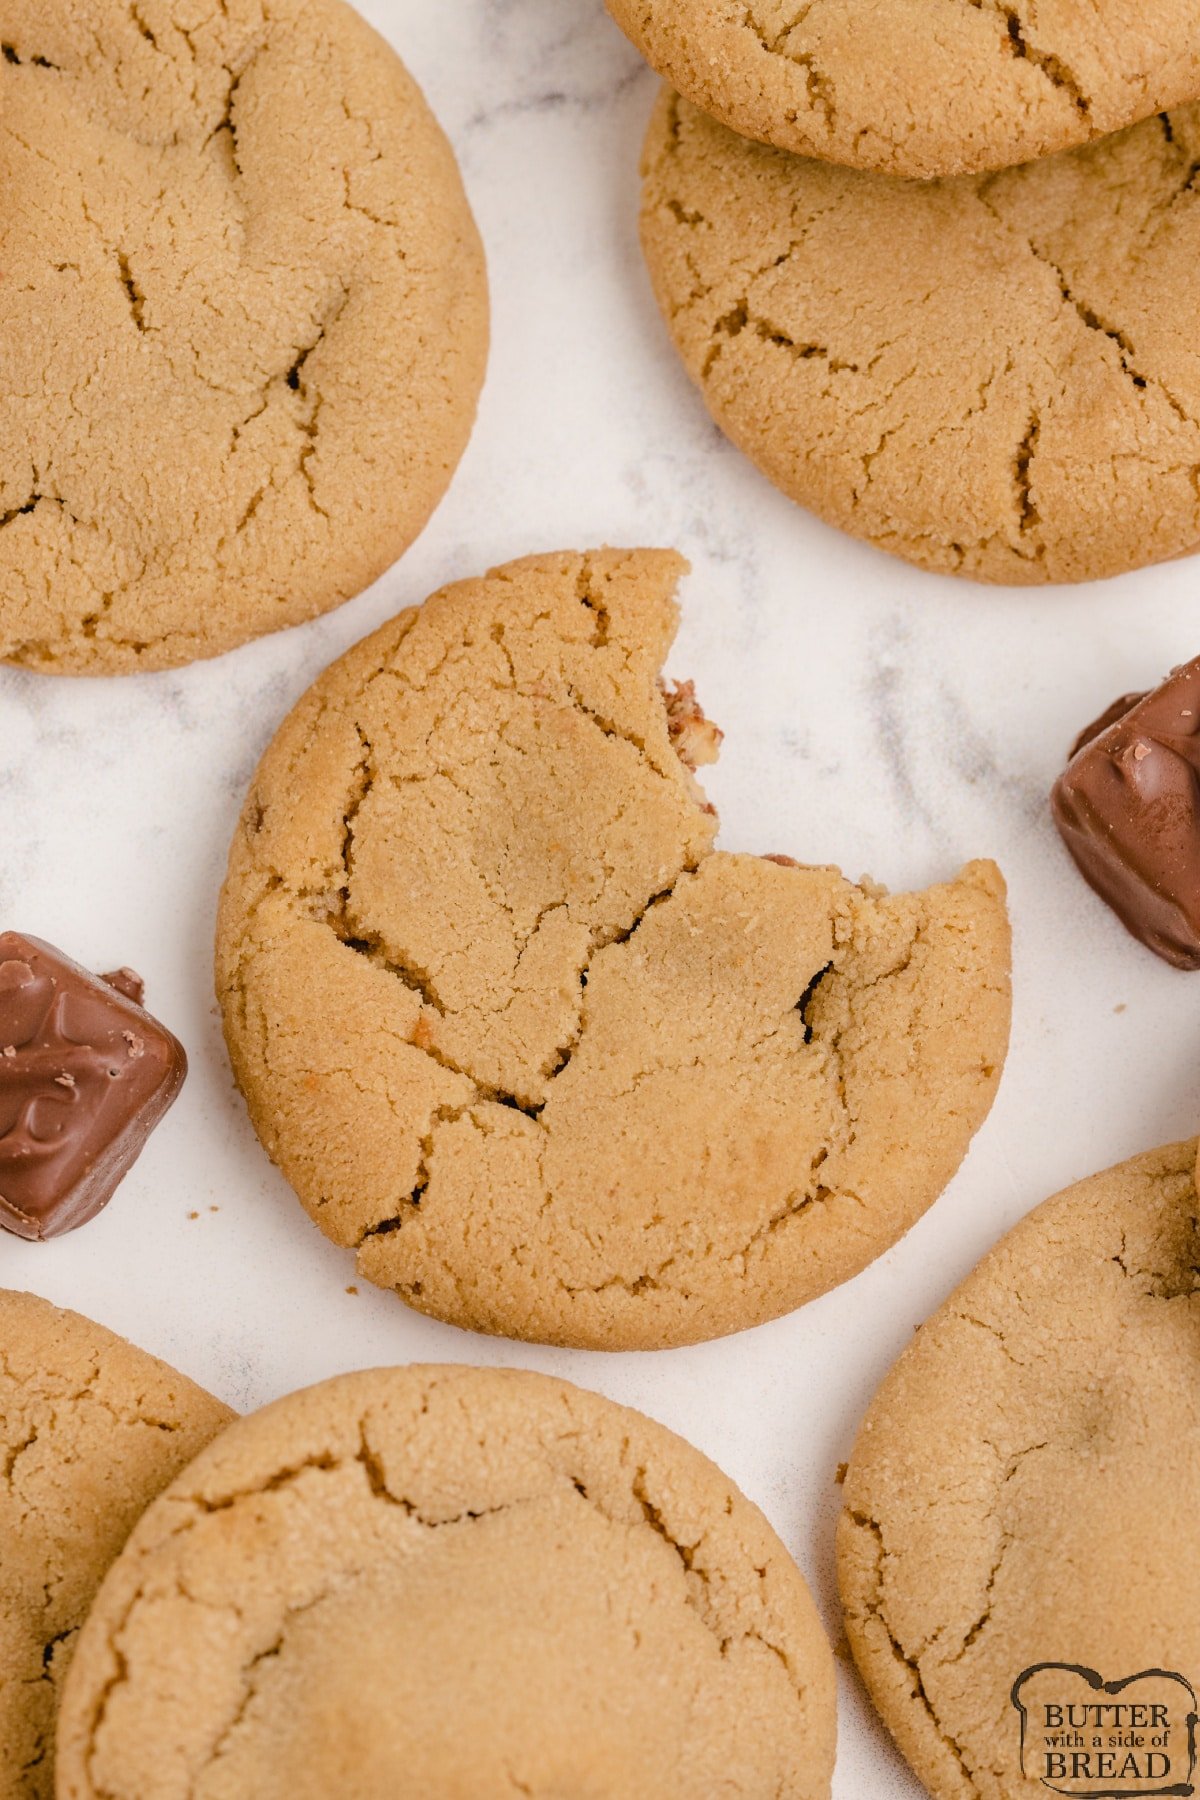 Peanut Butter Cookie recipe with Snickers in the center